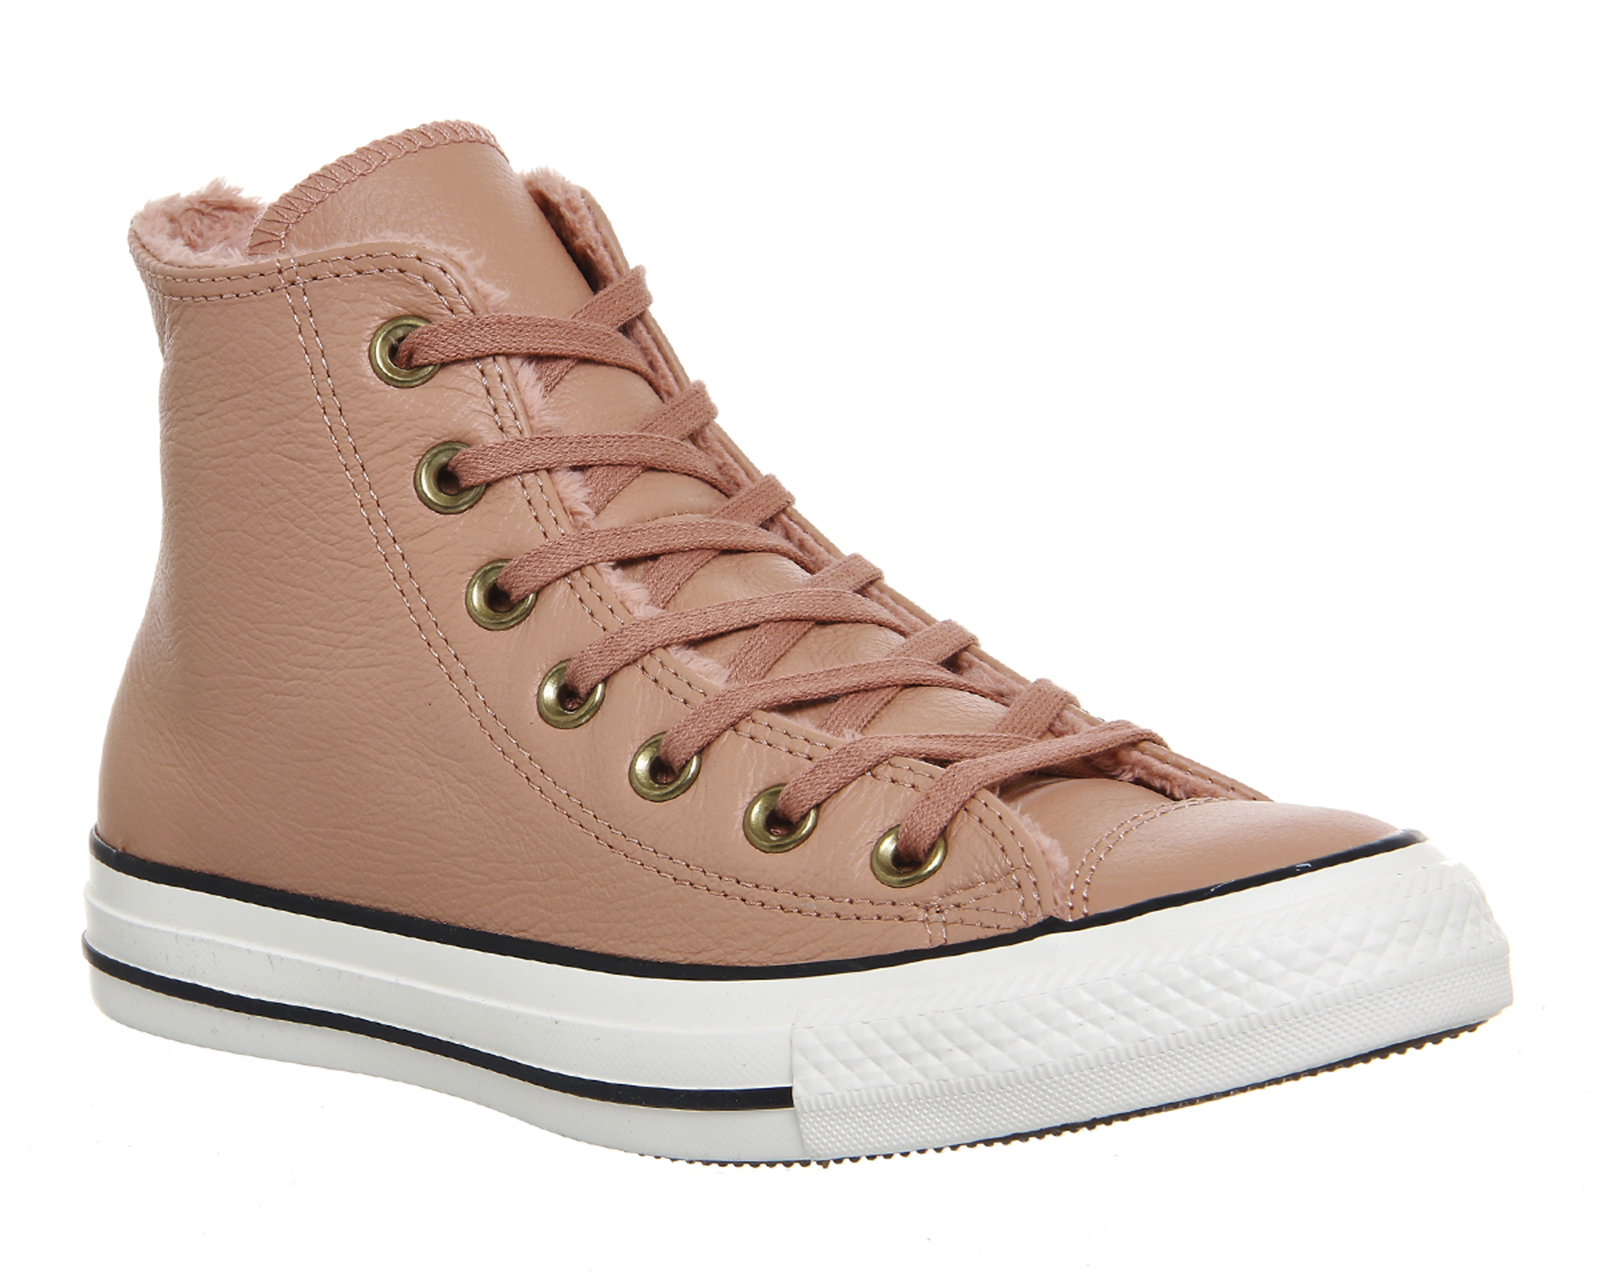 Converse All Star Hi Leather Trainers Pink Blush Fur Black - Hers trainers